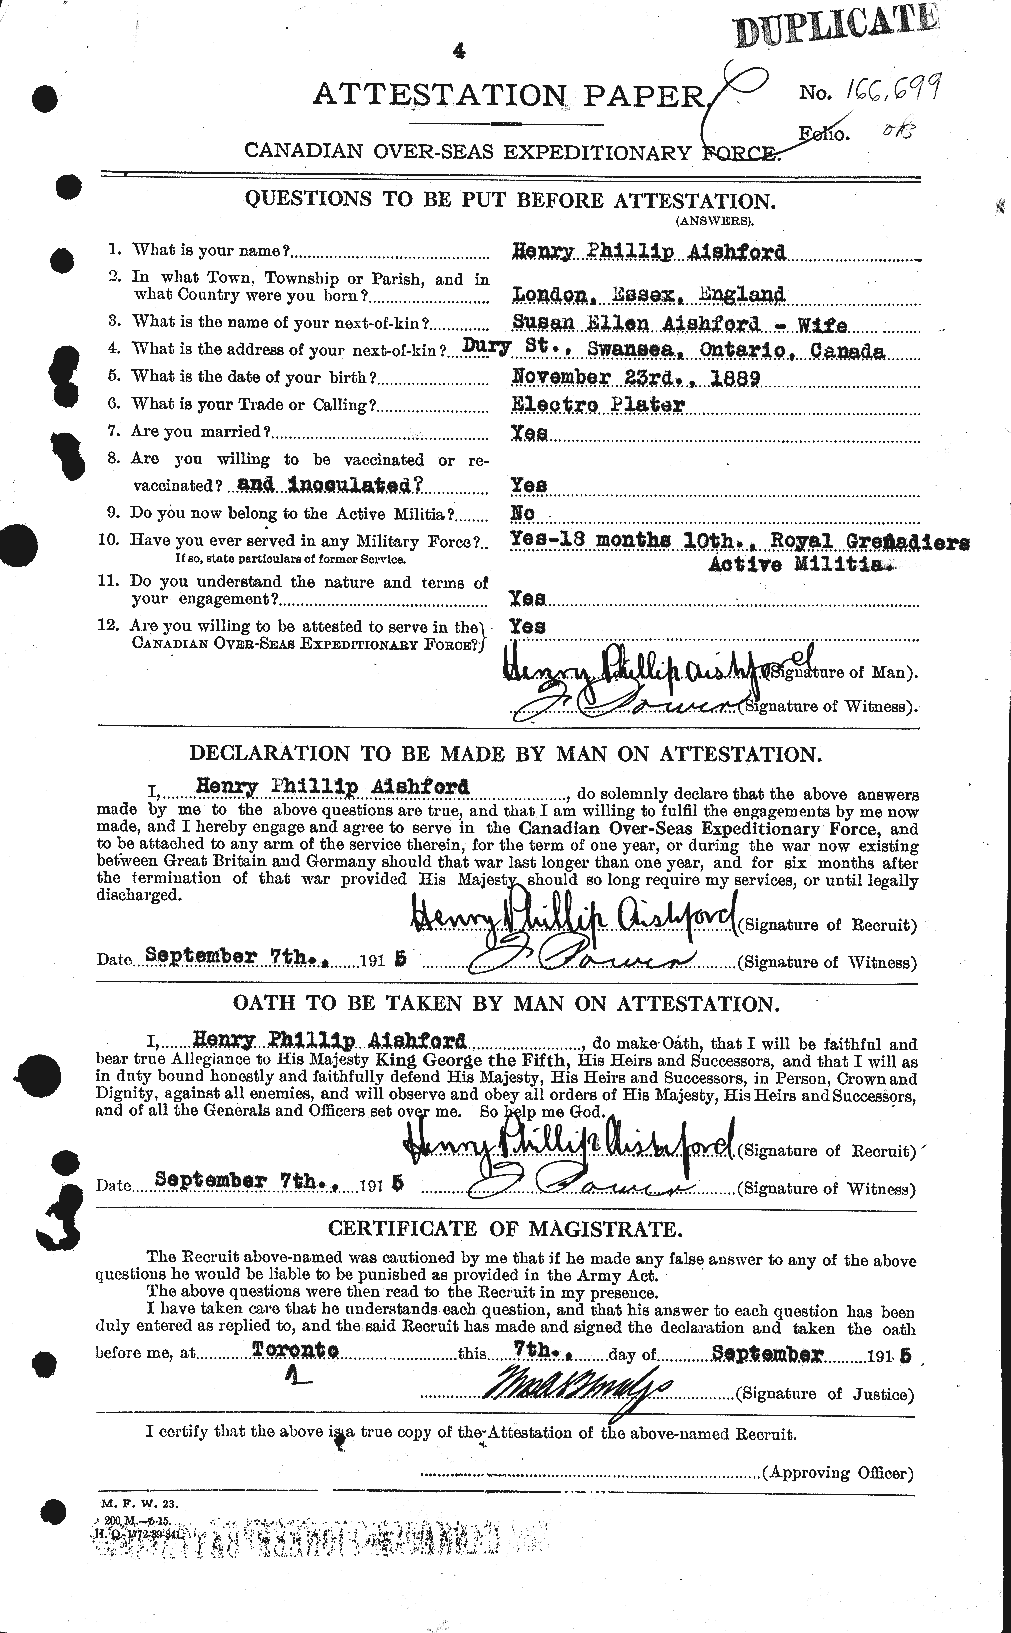 Personnel Records of the First World War - CEF 203101a